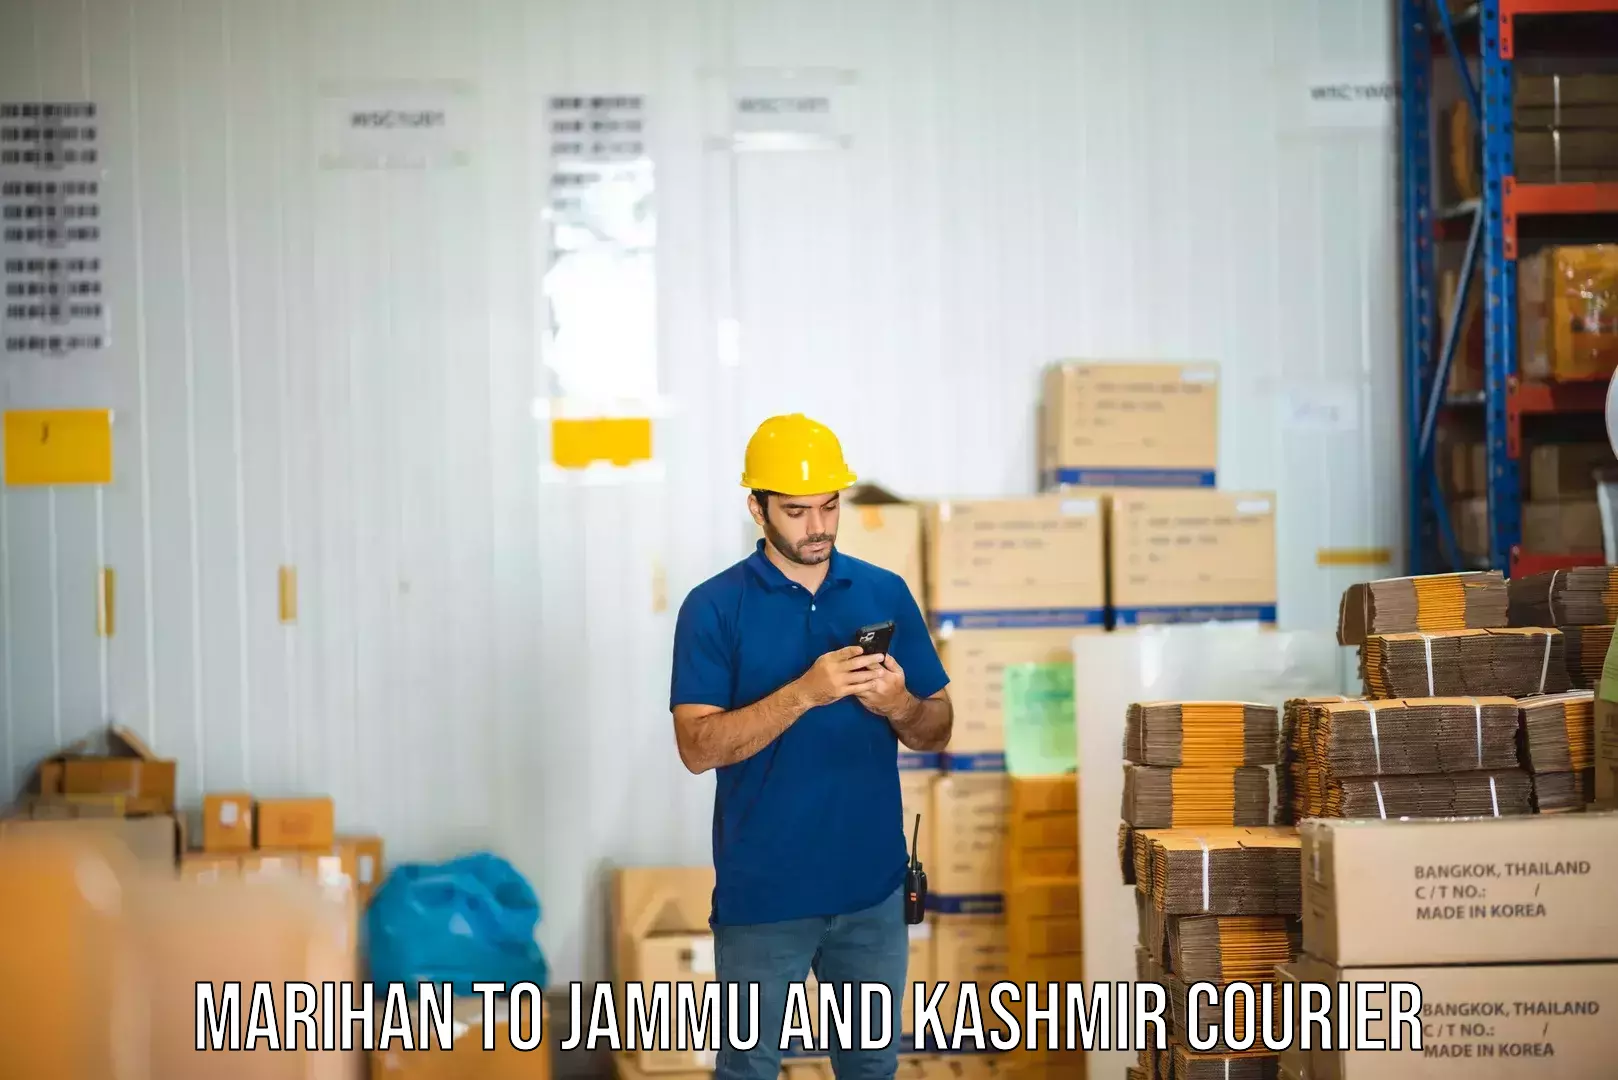 End-to-end delivery Marihan to Jammu and Kashmir